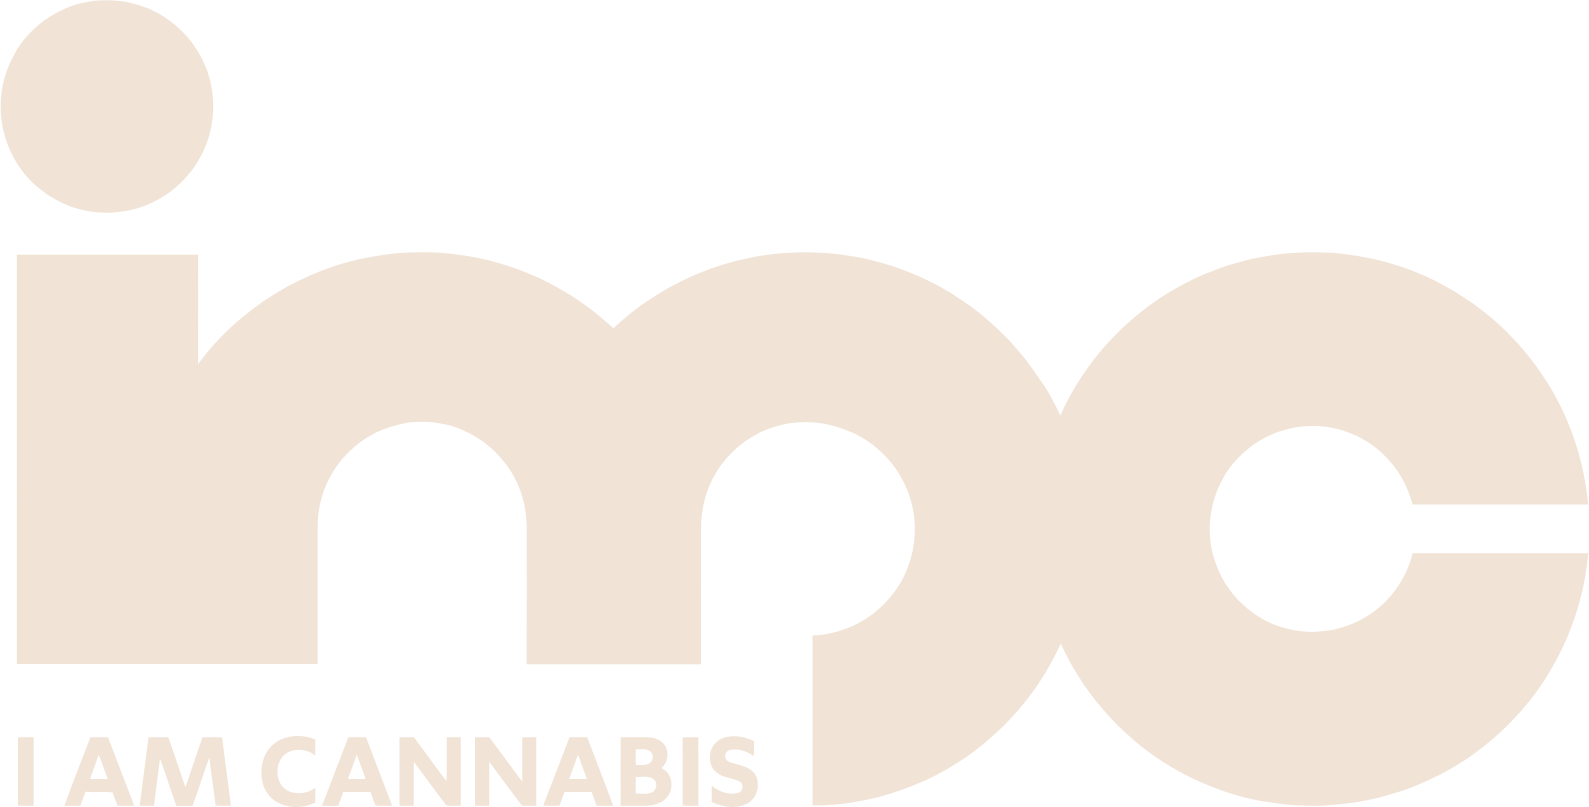 IM Cannabis logo large for dark backgrounds (transparent PNG)